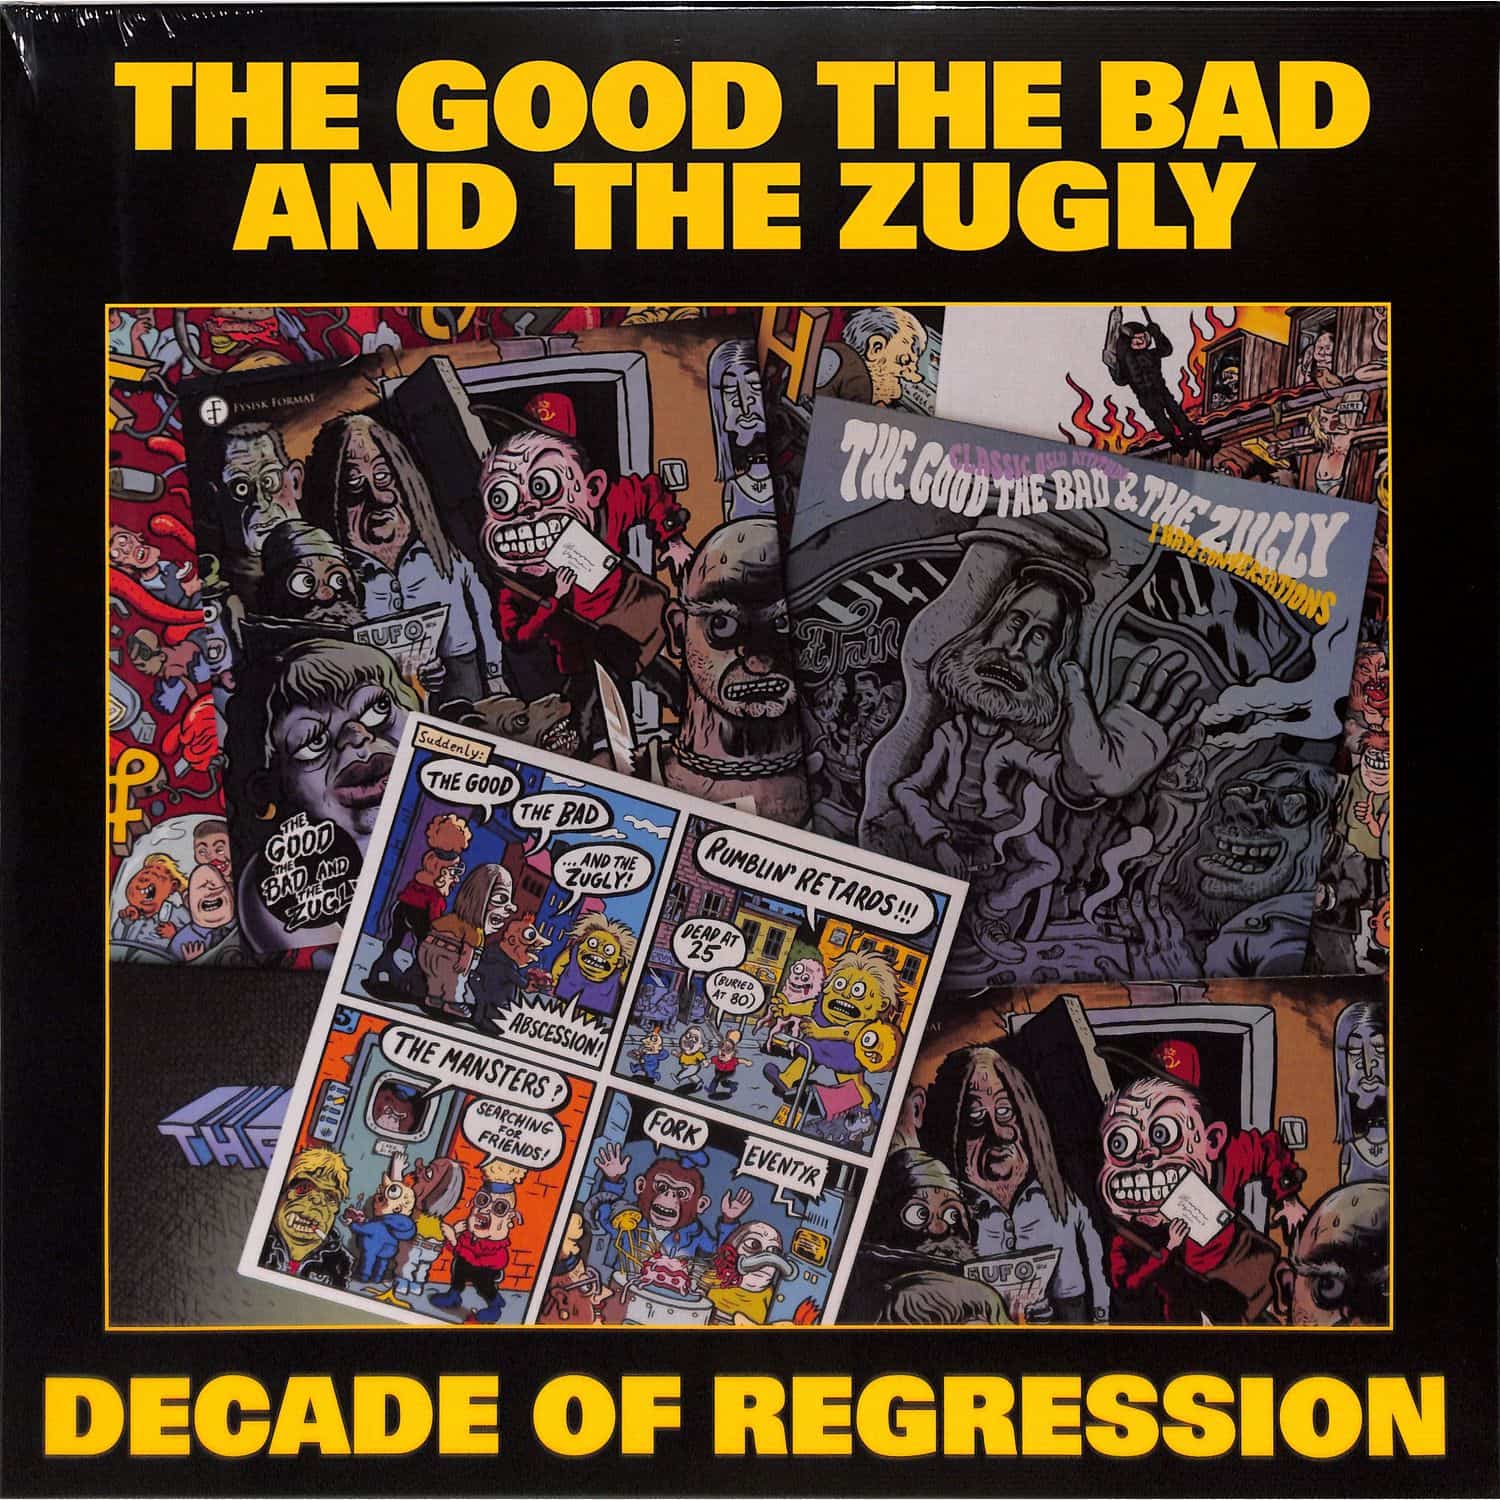 The Bad The Good & The Zugly - DECADE OF REGRESSION 